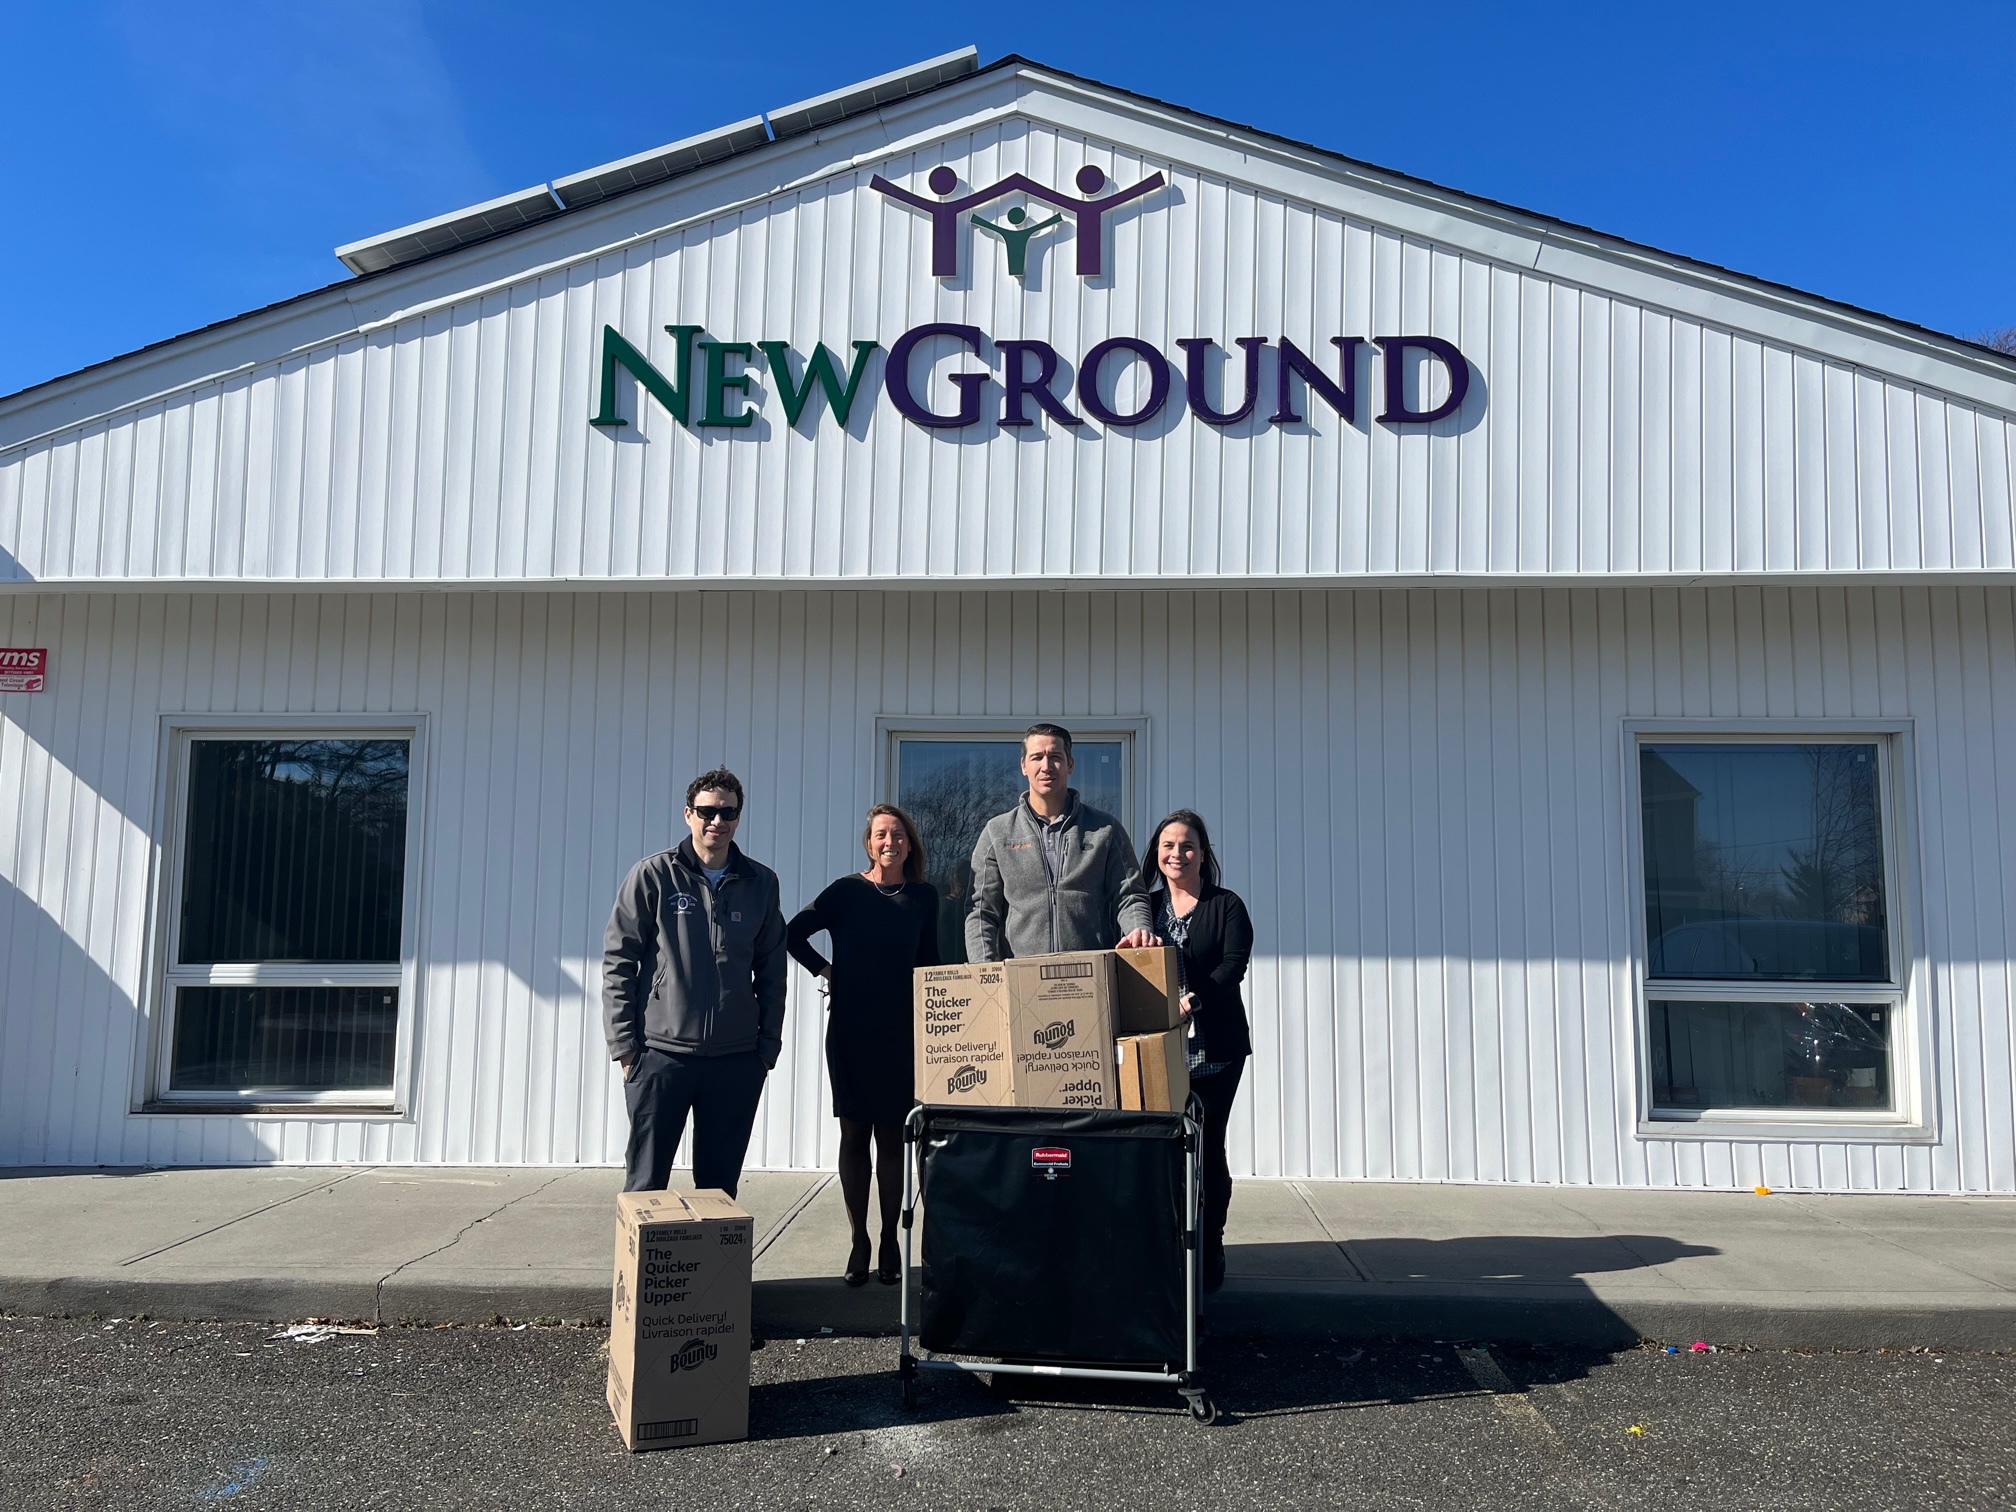 NewGround
Breaking the Cycle of Homelessness